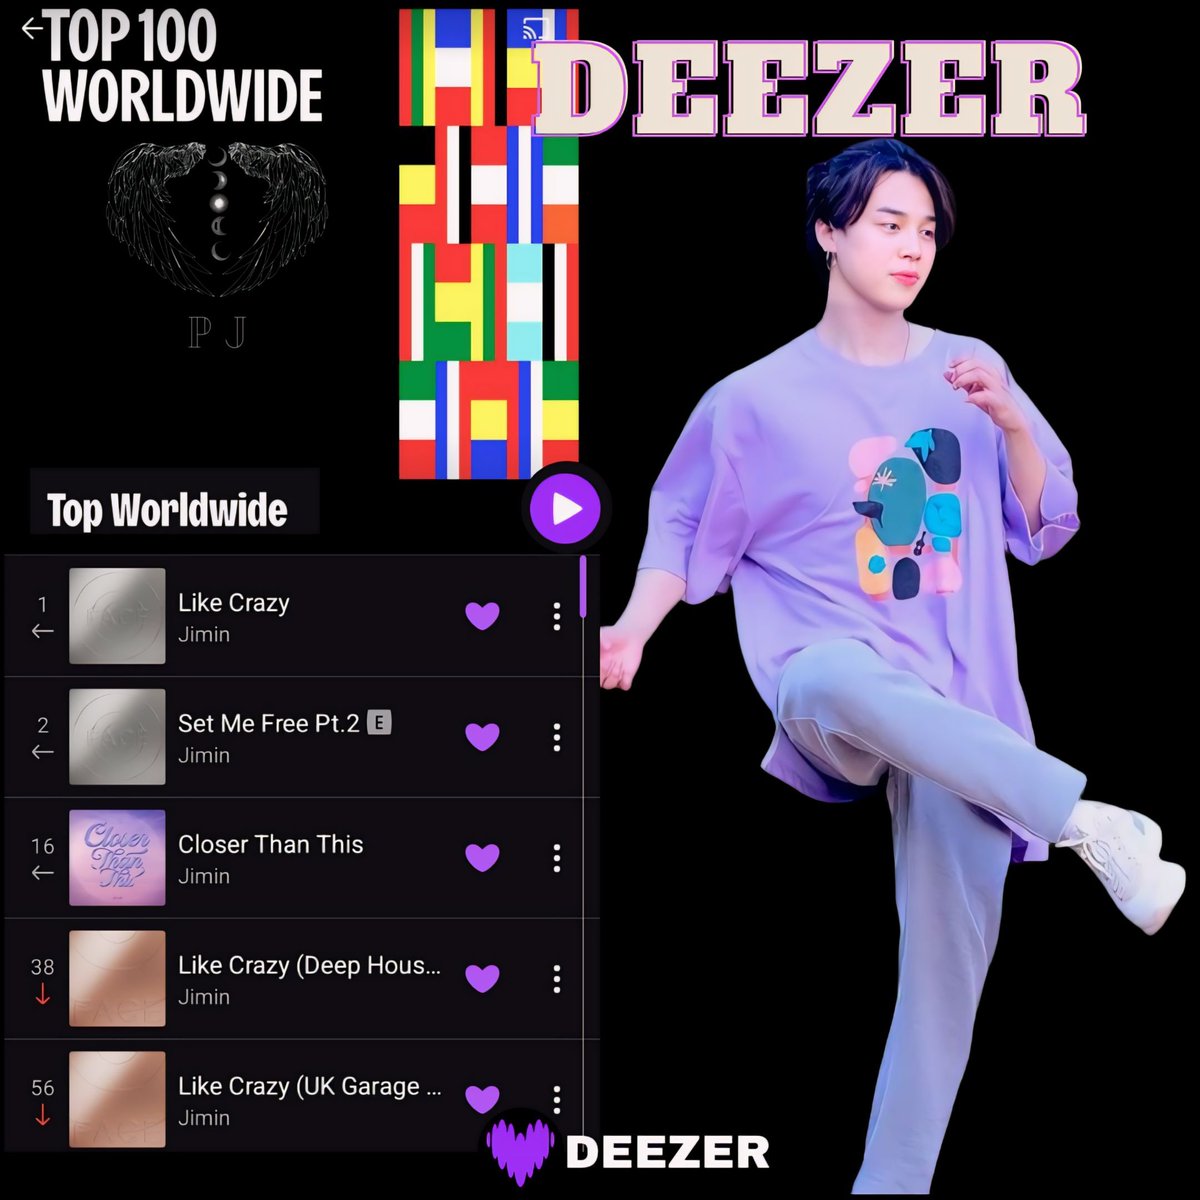 May 15, 2024
Like Crazy by Jimin is  remains at #1 on the Deezer Top 100 Worldwide Chart, whit a record extending 85 days💪

Don't stop streaming

JIMIN JIMIN
#LikeCrazy by #JIMIN
#DeezerKingJimin 
#LikeCrazyDeezerTop1
#1LikeCrazyDeezerGlobal
#지민 #PJMs #Jiministas @BTS_twt